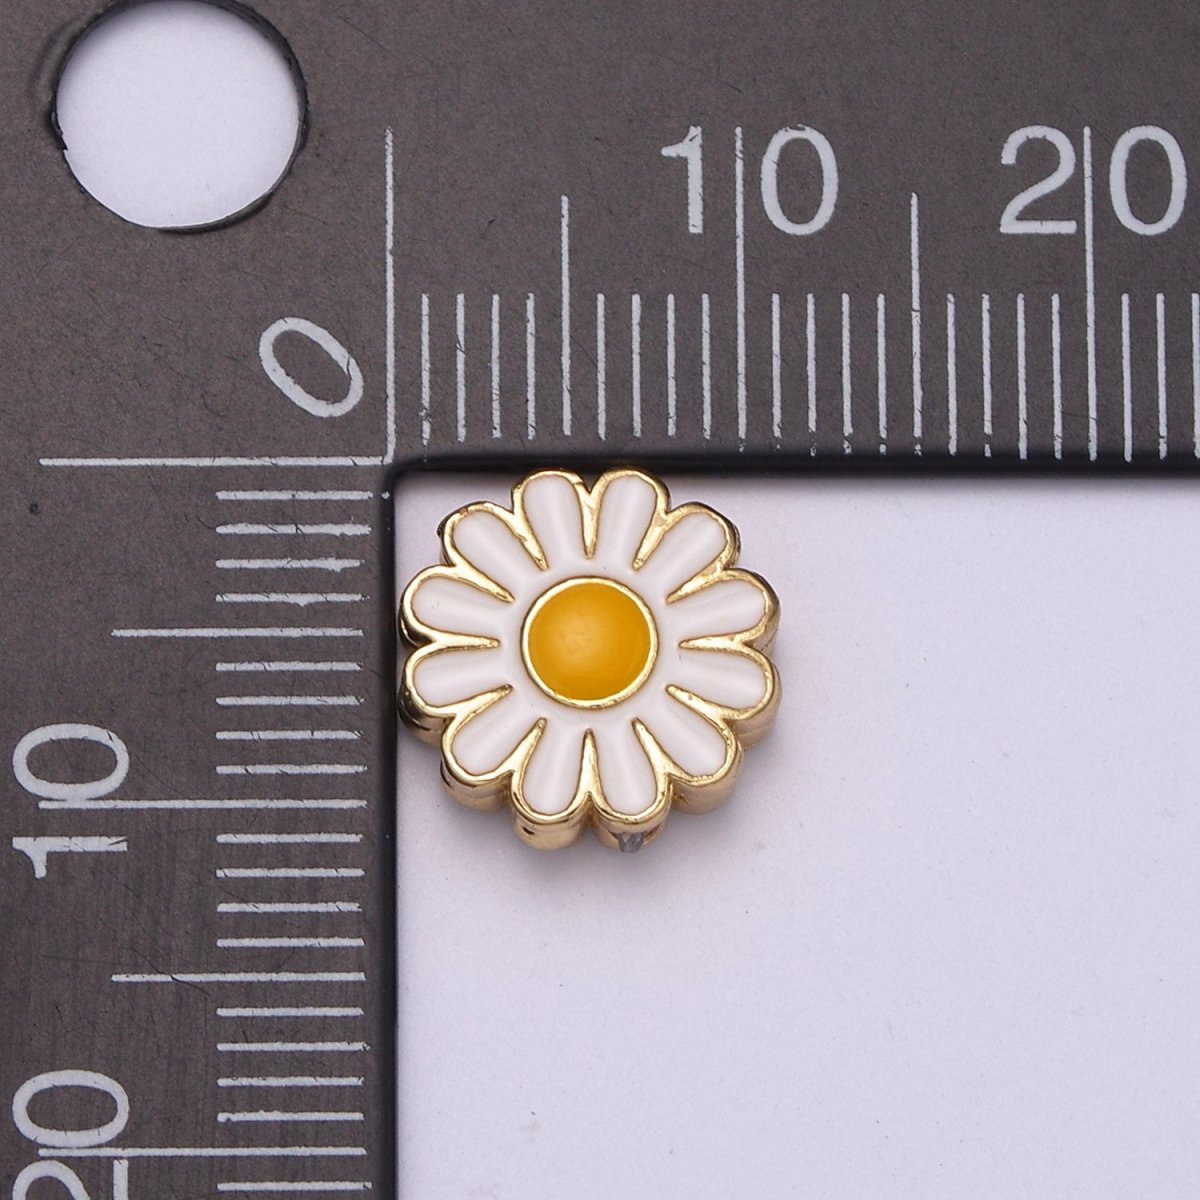 10mm Daisy Flower Bead Spacer White Mini Floral Nature Gold Filled Art Jewelry Making Beads B-765 - DLUXCA